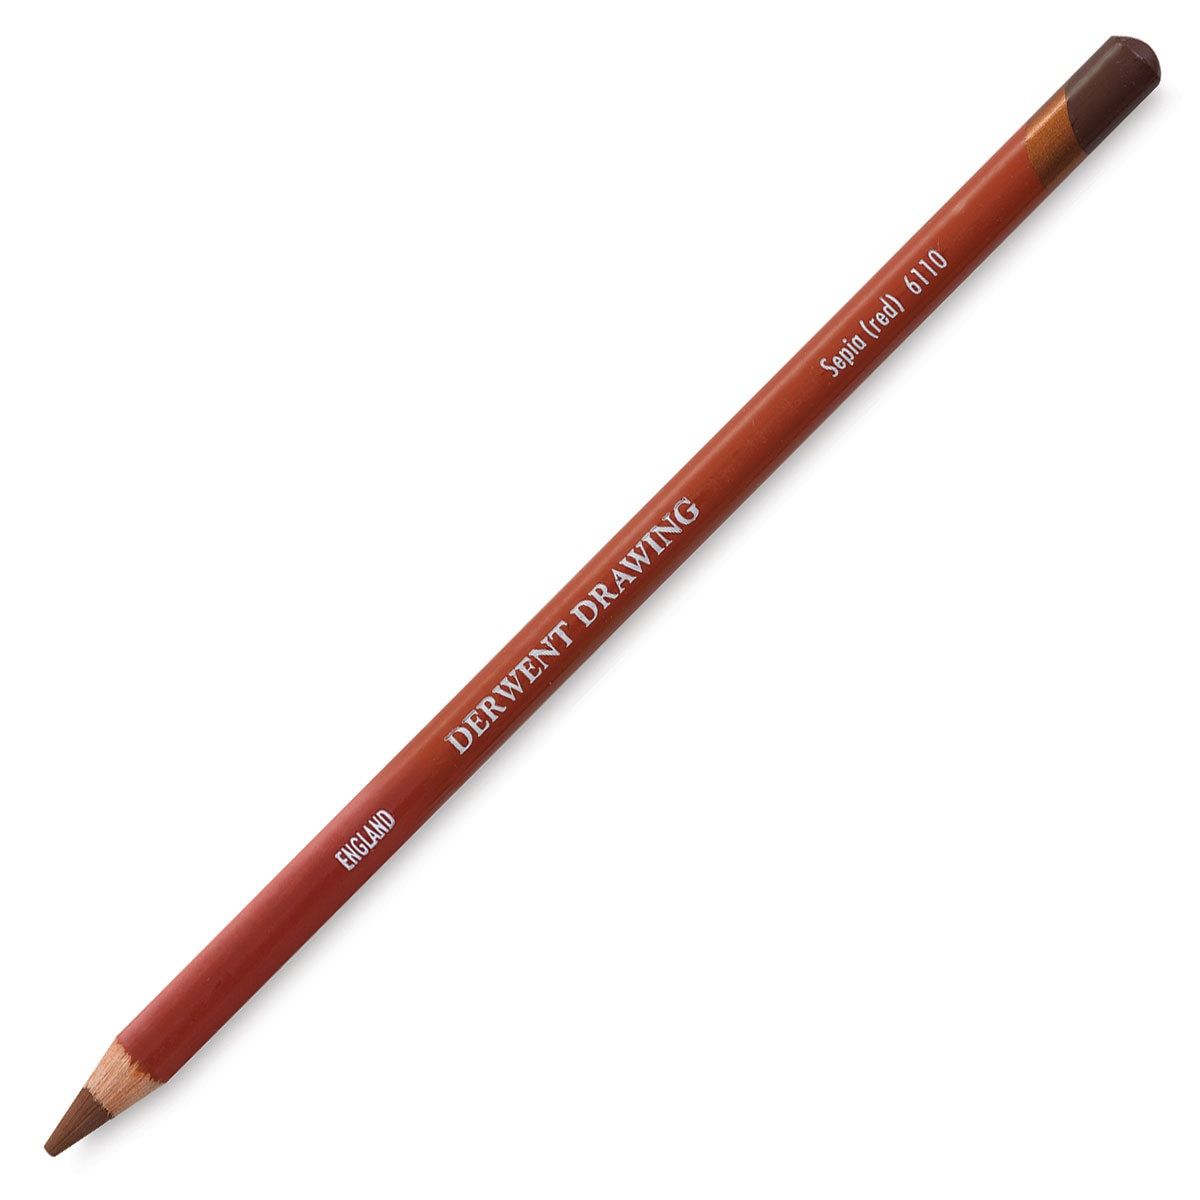 Derwent Drawing Pencil - Sepia Red